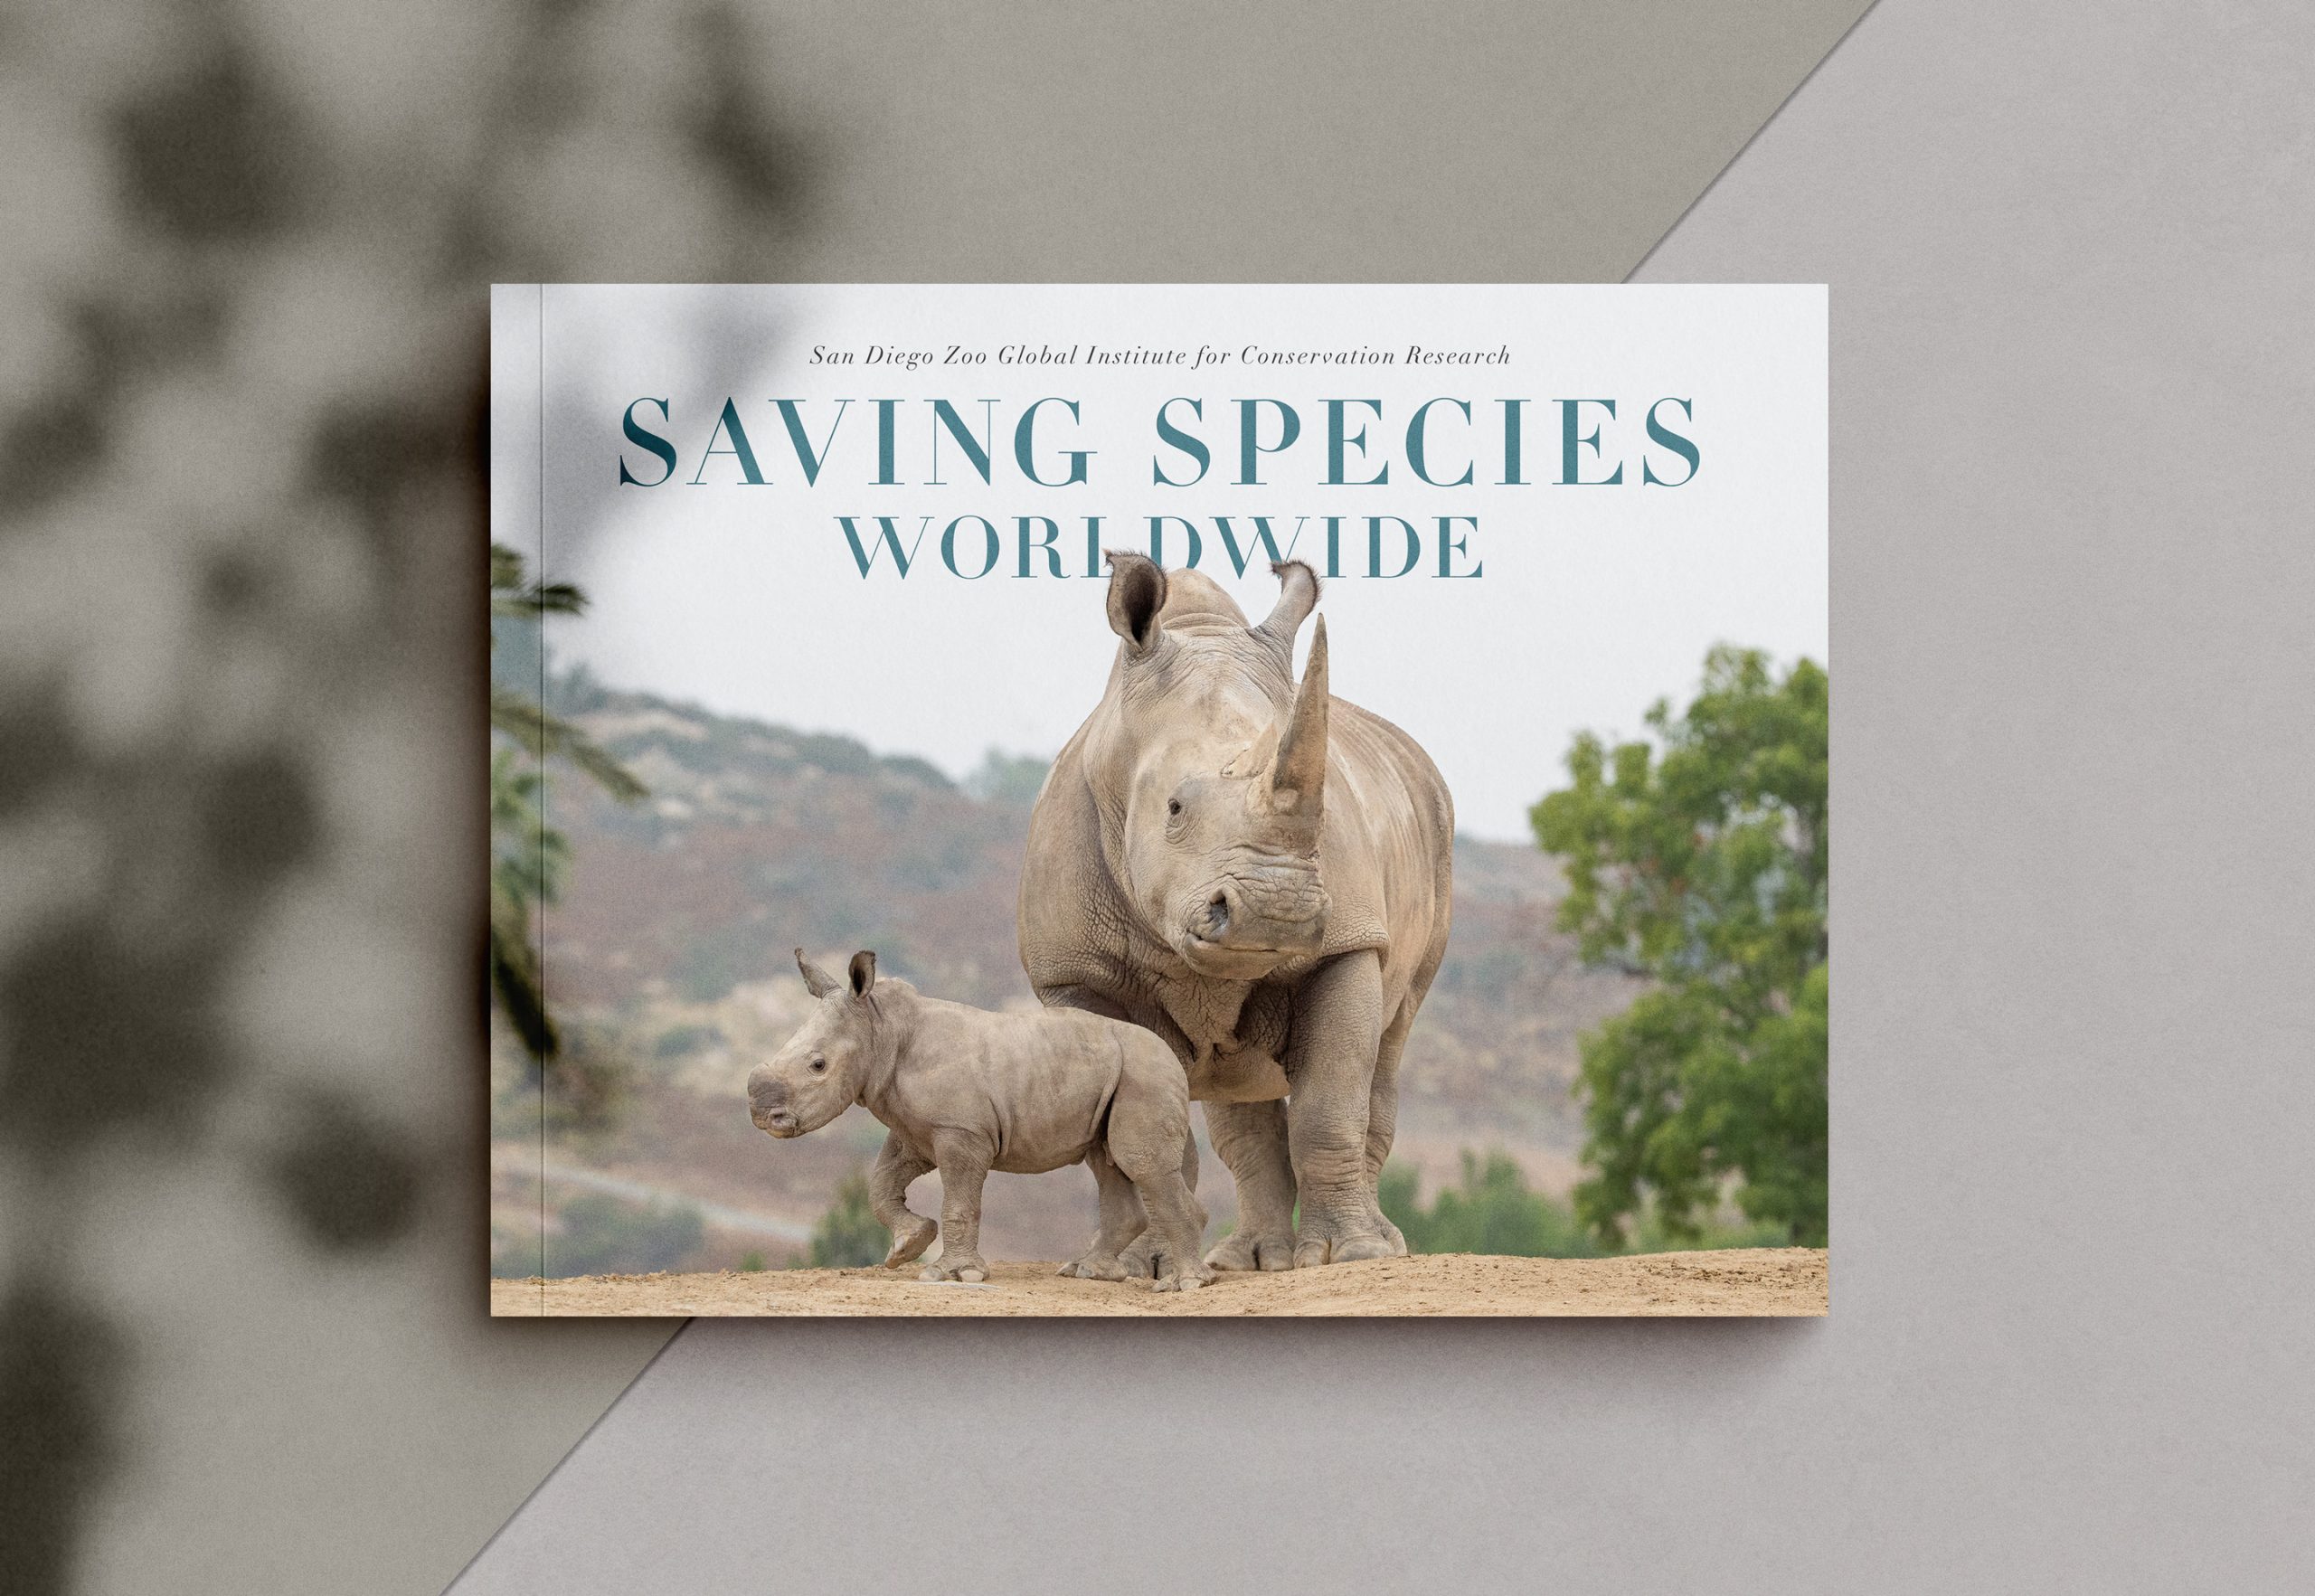 San Diego Zoo Global Institute for Conservation Research: Saving Species Worldwide